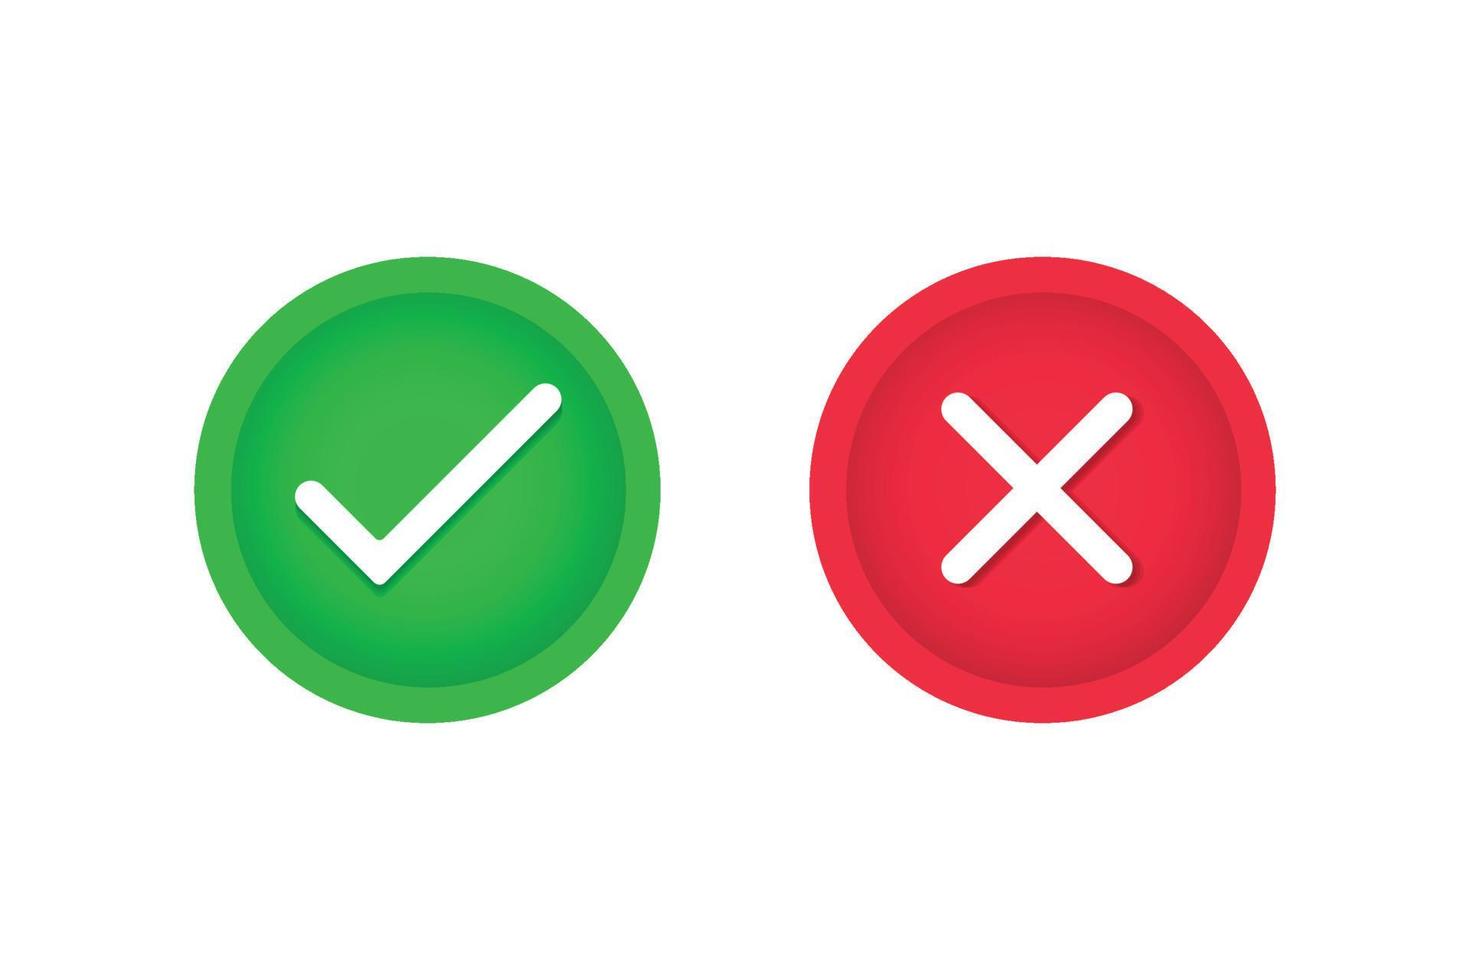 Free vector green check mark and red cross buttons symbol design